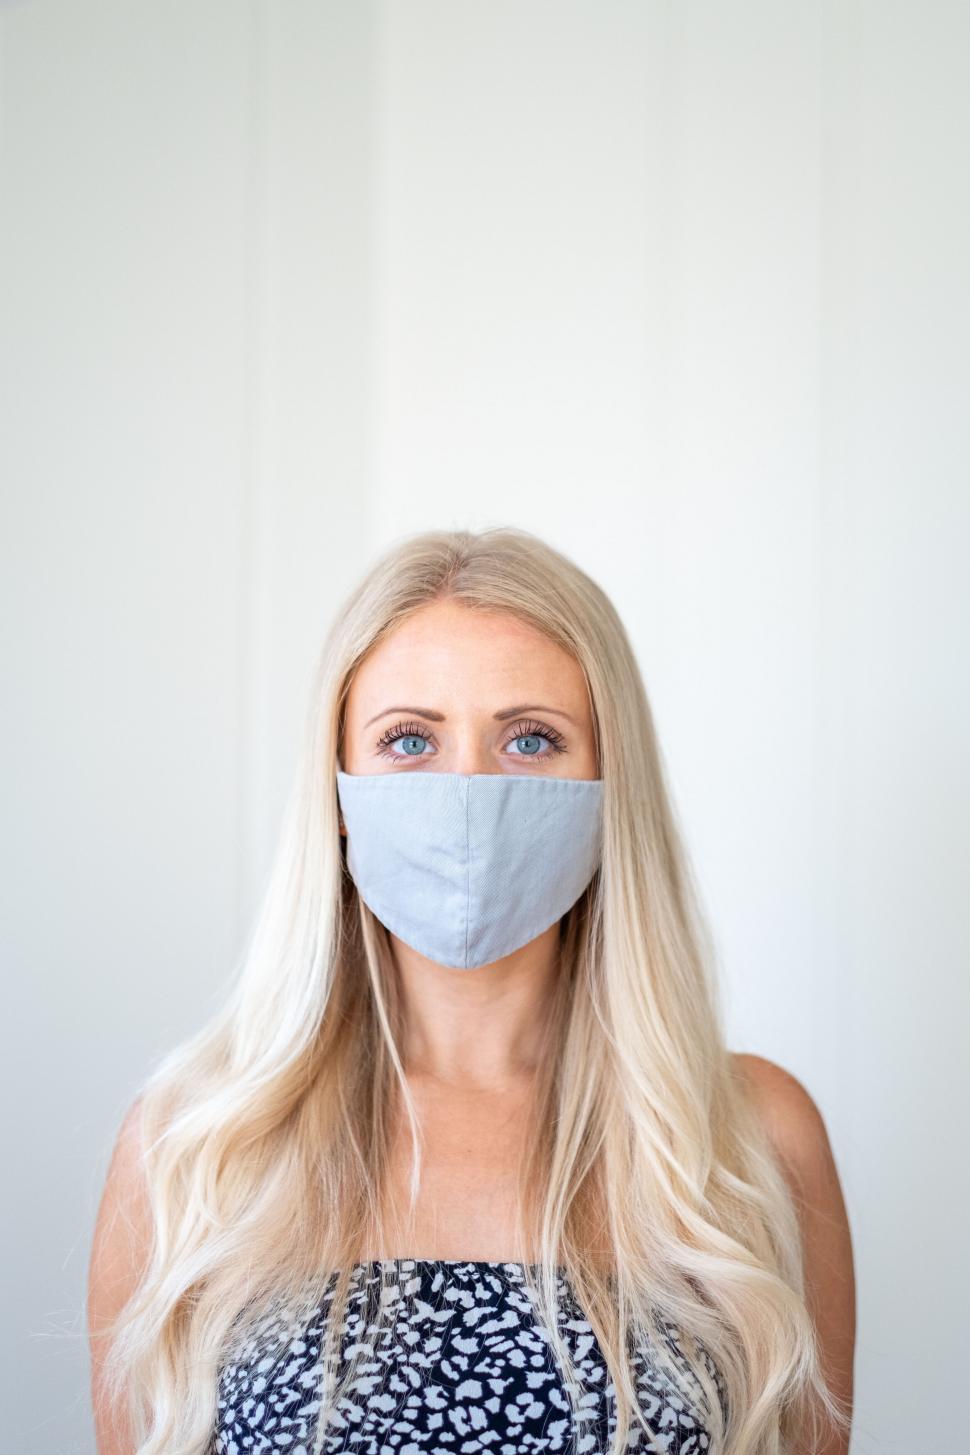 Free Image of Woman wearing a mask during a pandemic 